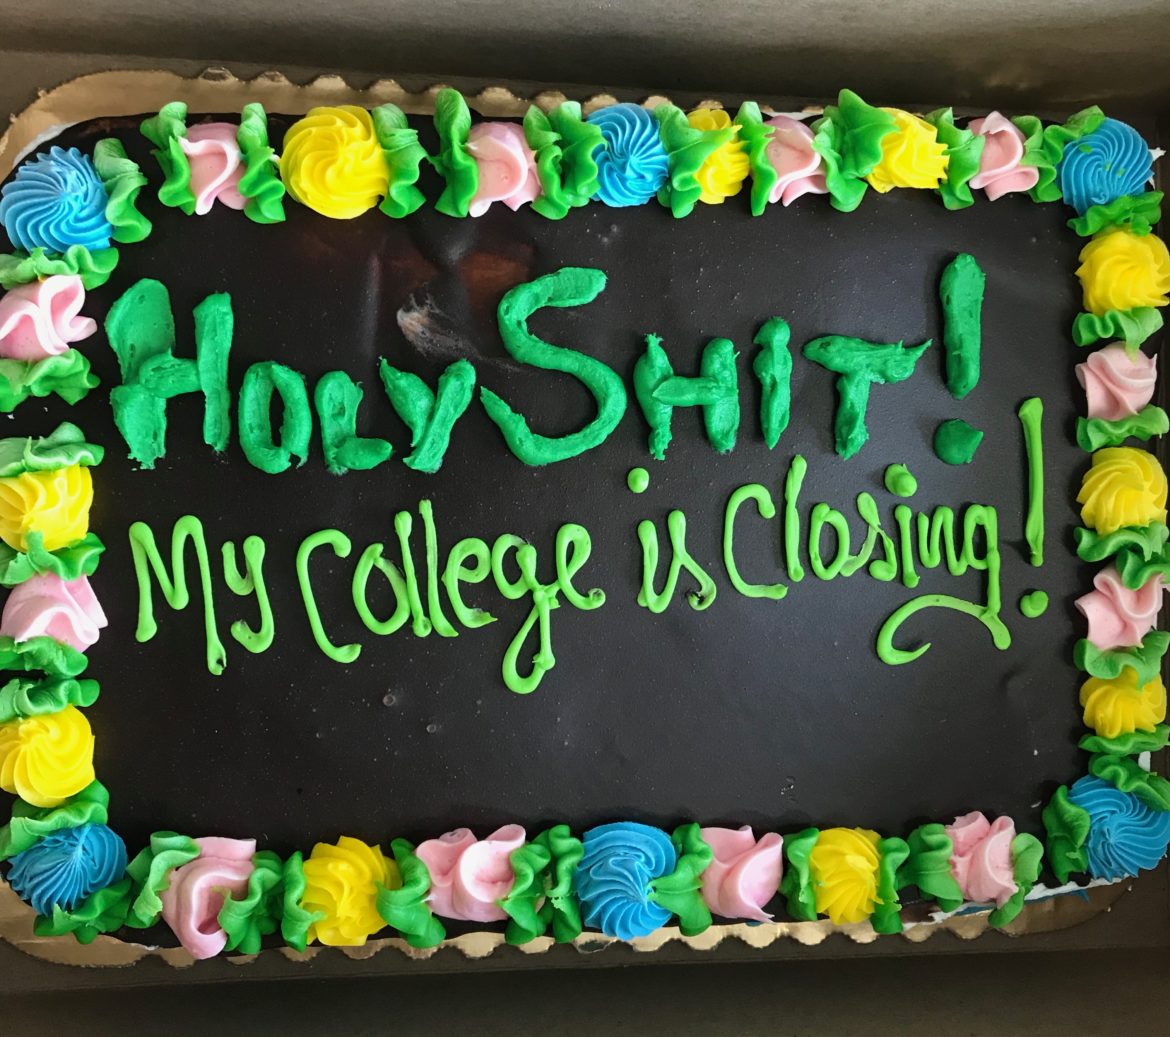 A cake that reads, "Holy shit! My college is closing!"